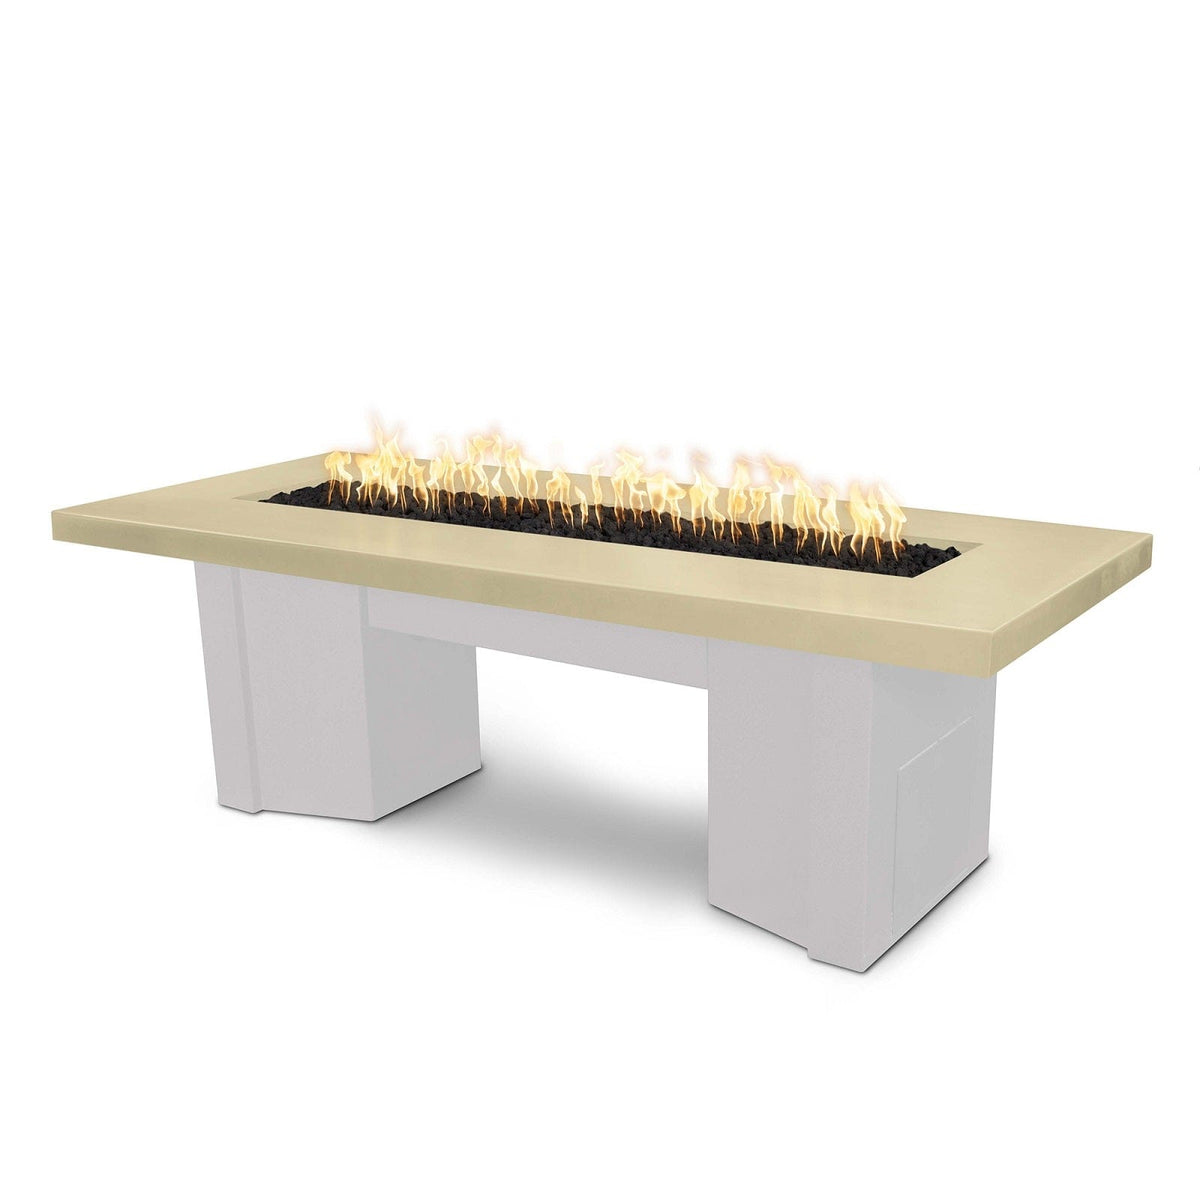 The Outdoor Plus Fire Features Vanilla (-VAN) / White Powder Coated Steel (-WHT) The Outdoor Plus 60&quot; Alameda Fire Table Smooth Concrete in Liquid Propane - Flame Sense System with Push Button Spark Igniter / OPT-ALMGFRC60FSEN-LP